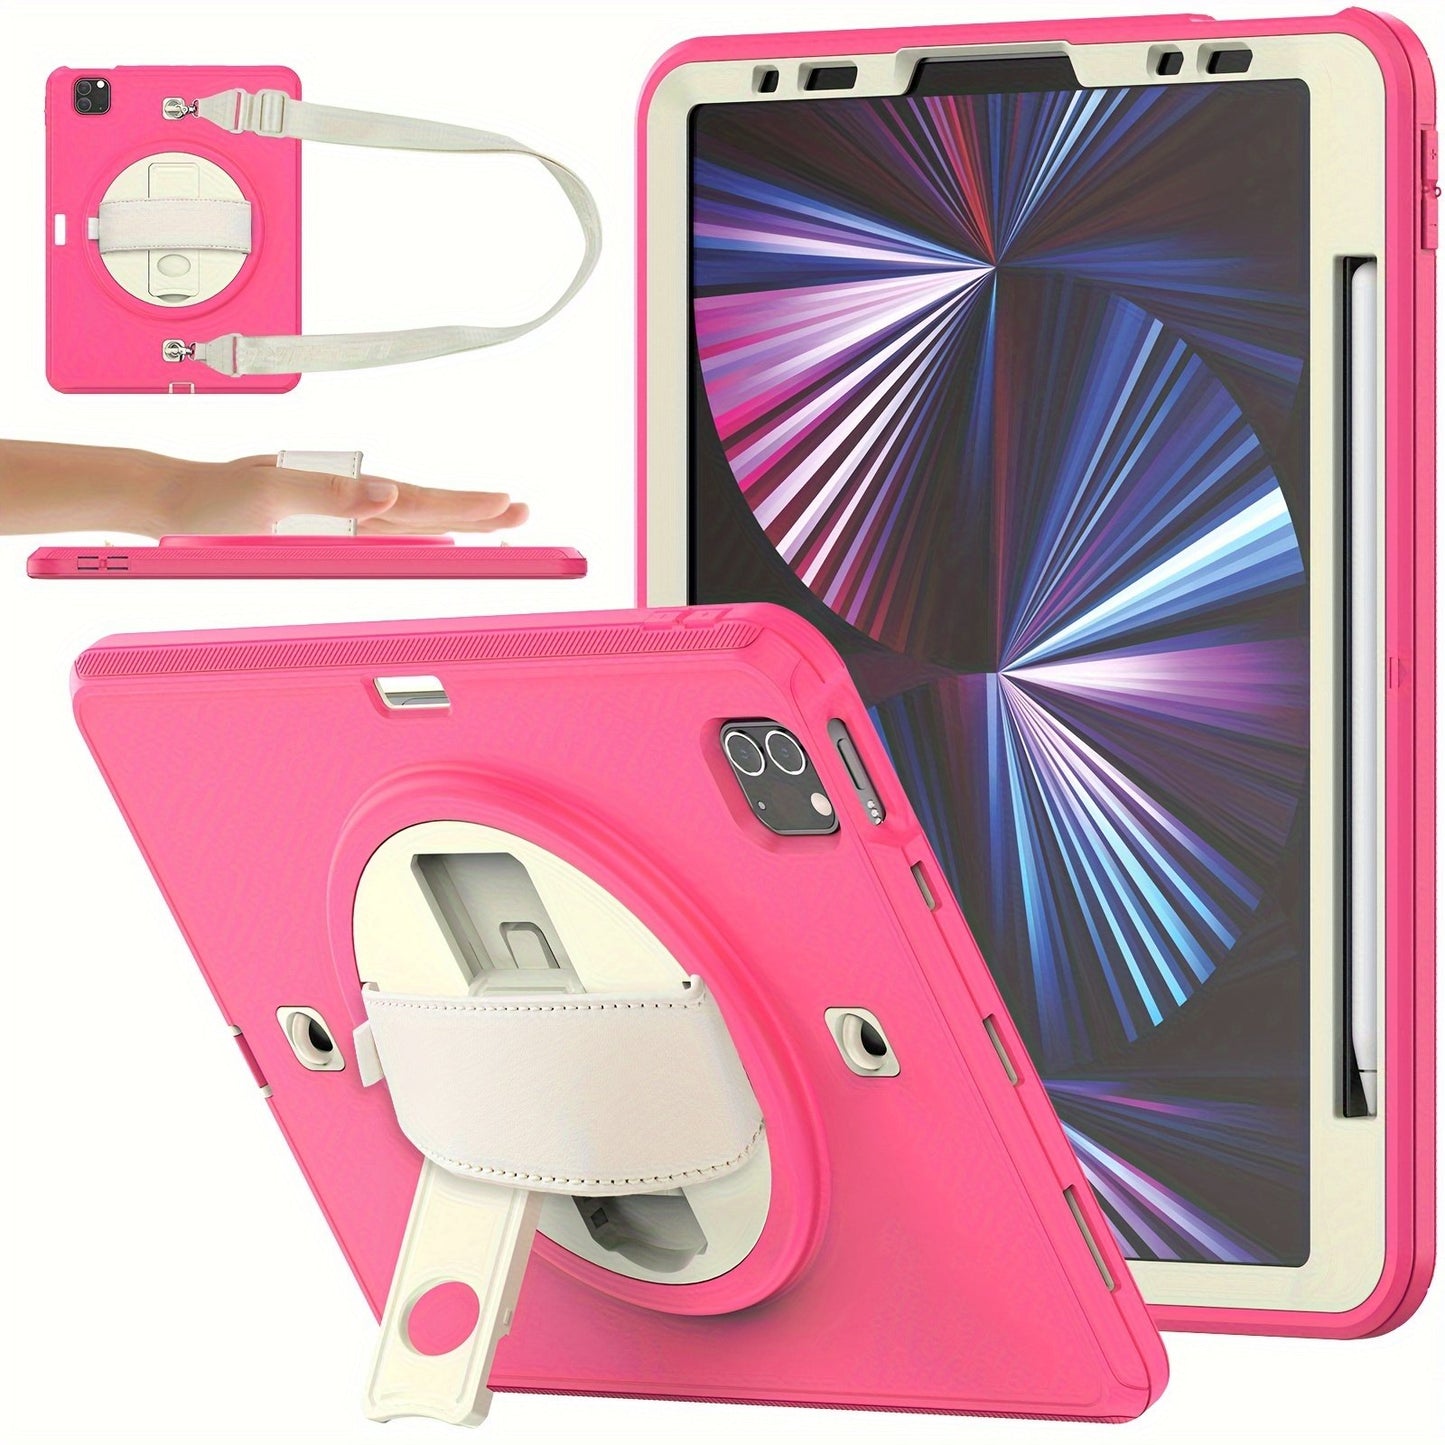 Case For IPad Air 4/Air 5 10.9-inch, For Pro 11-inch2022/2021/2020/2018; With Strong Protection, Screen Protector, Hand Strap, Shoulder Strap, Rotating Stand, Pencil Holder